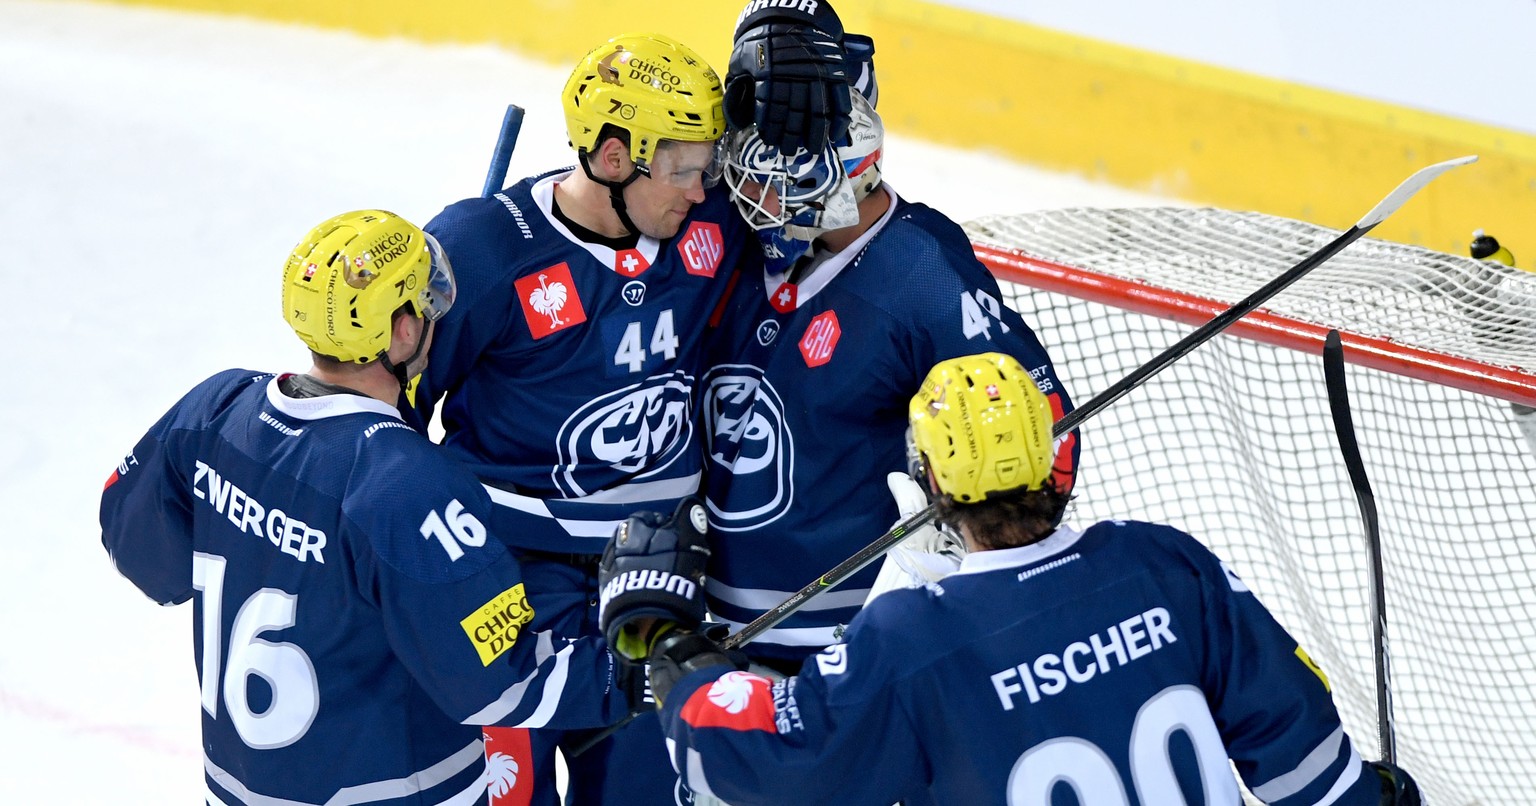 From left Ambri&#039;s player Dominic Zwerger, Ambri&#039;s player Nick Plastino, Ambri&#039;s goalkeeper Dominik Hrachovina and Ambri&#039;s player Jannik Fischer celebrate, during the round game of  ...